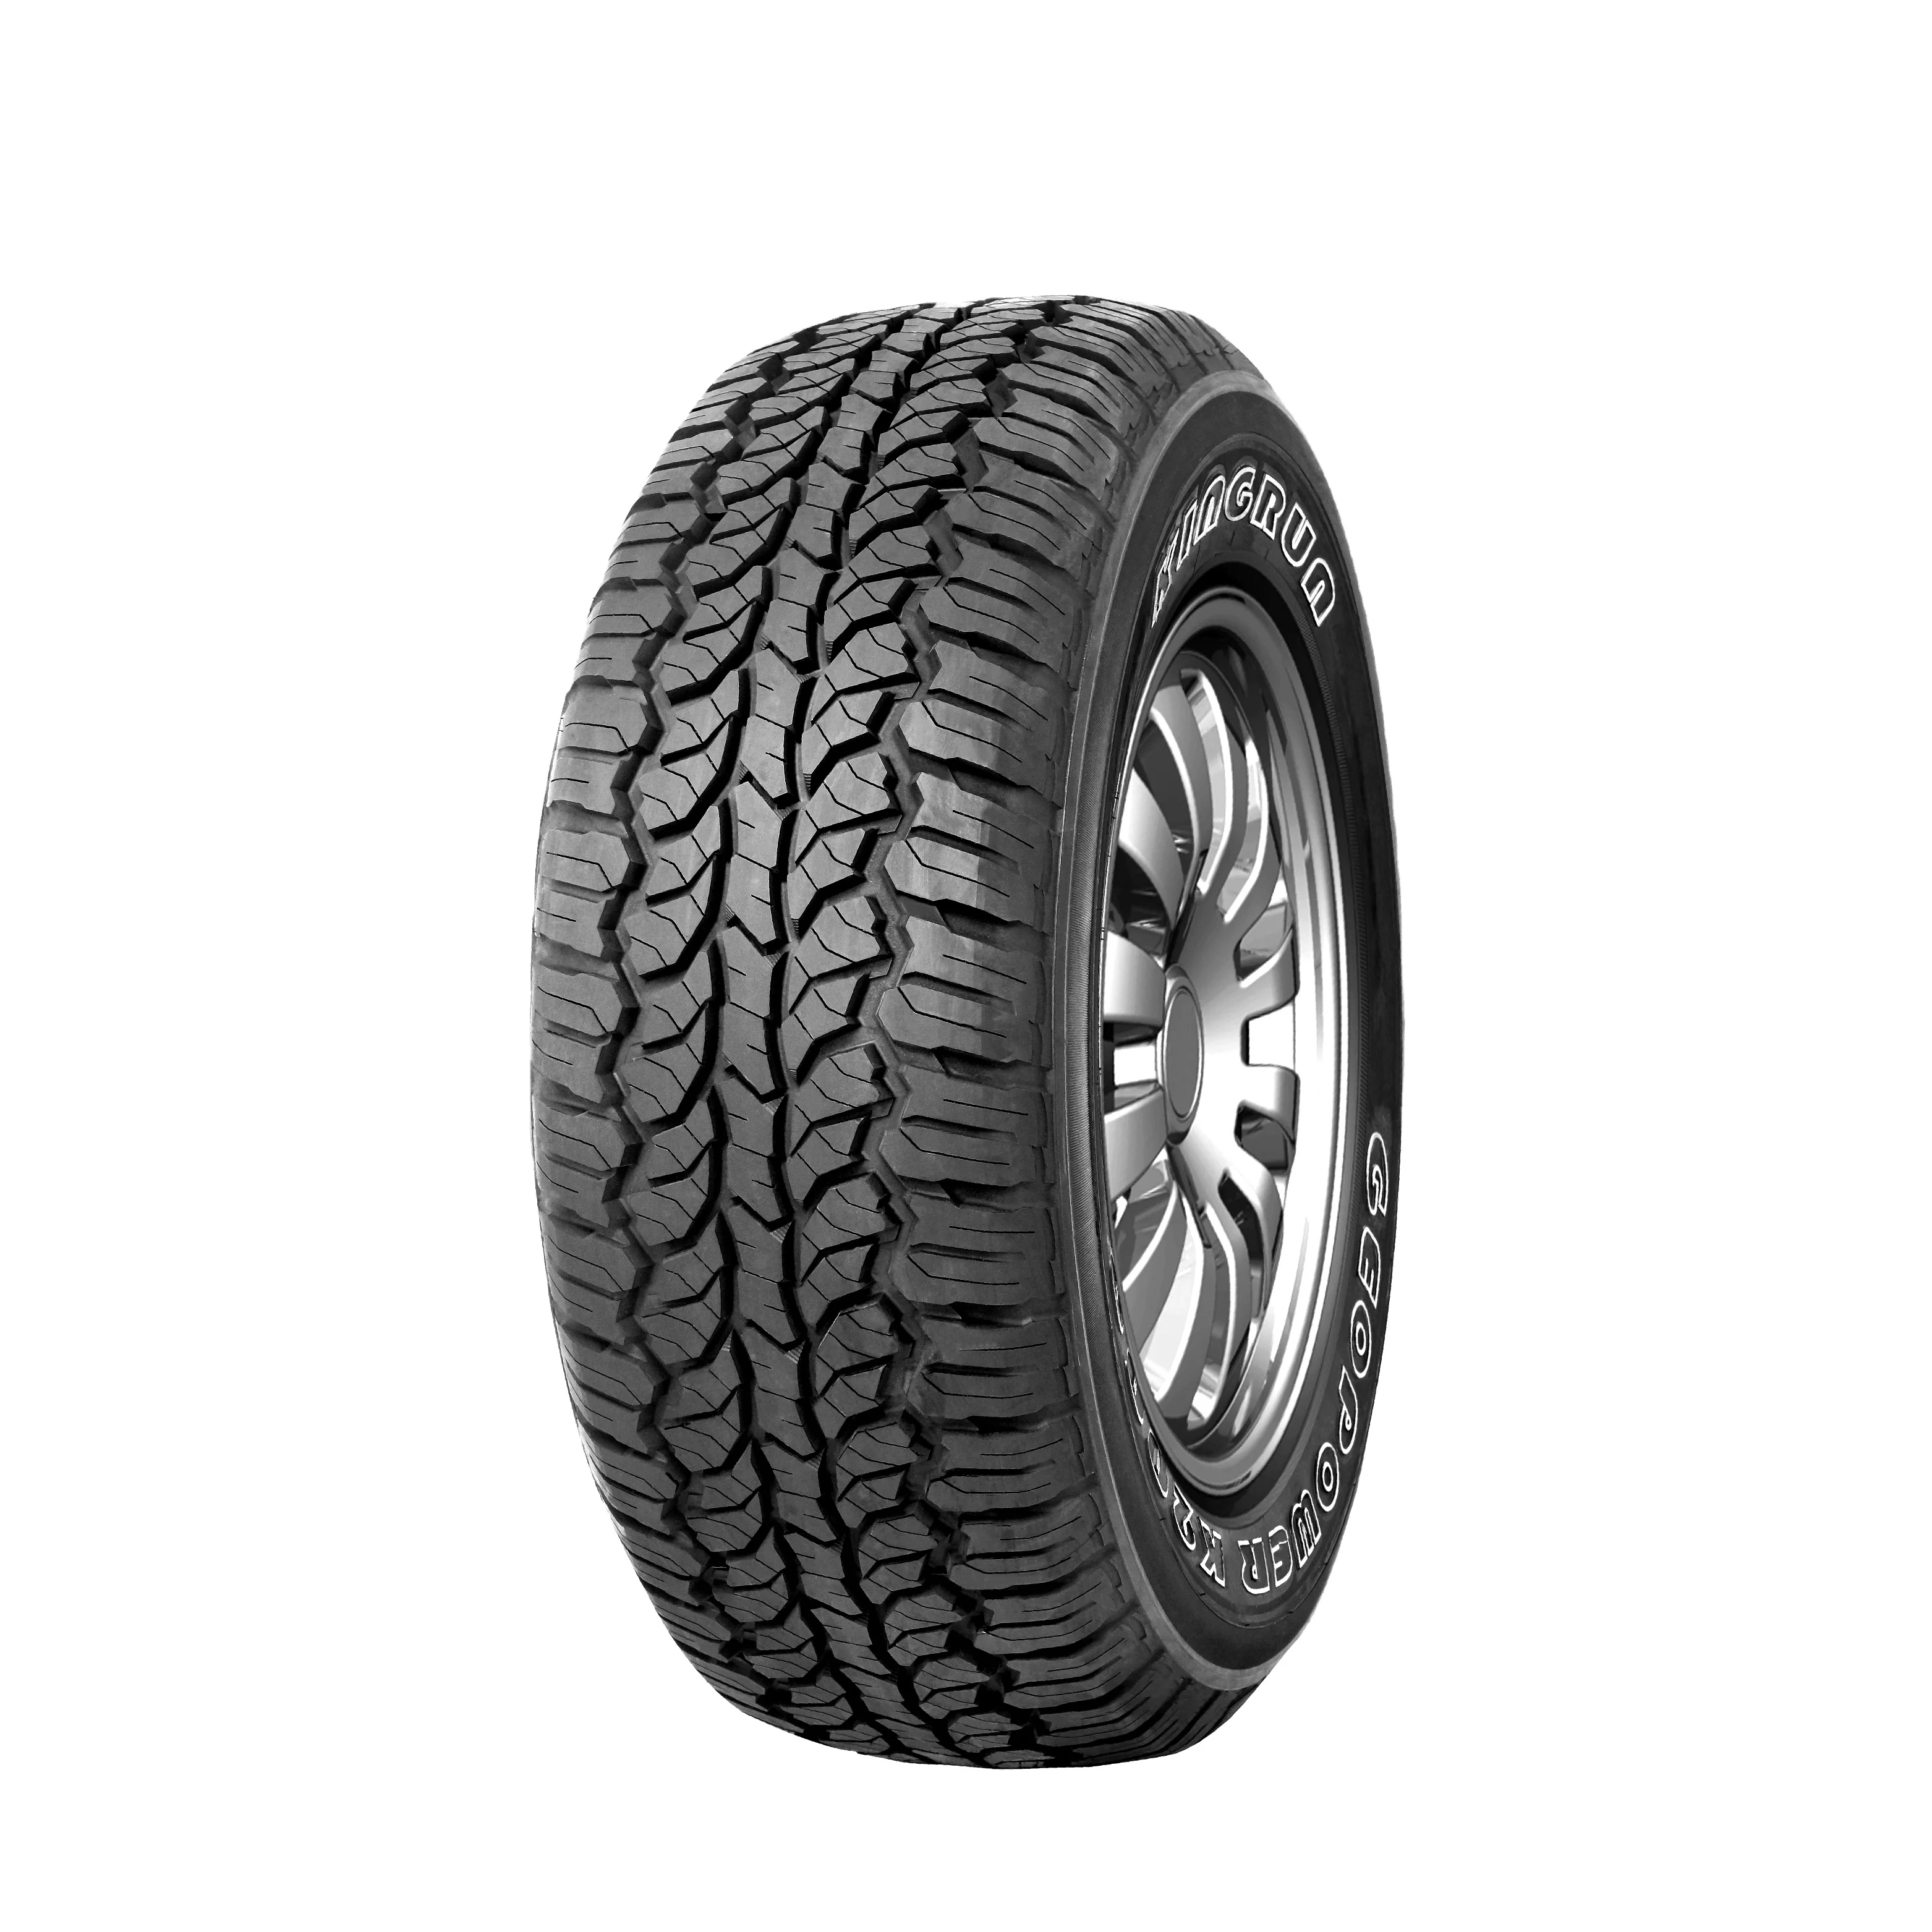 good quality AT MT tire tyres holland minibus for sale chinese vans